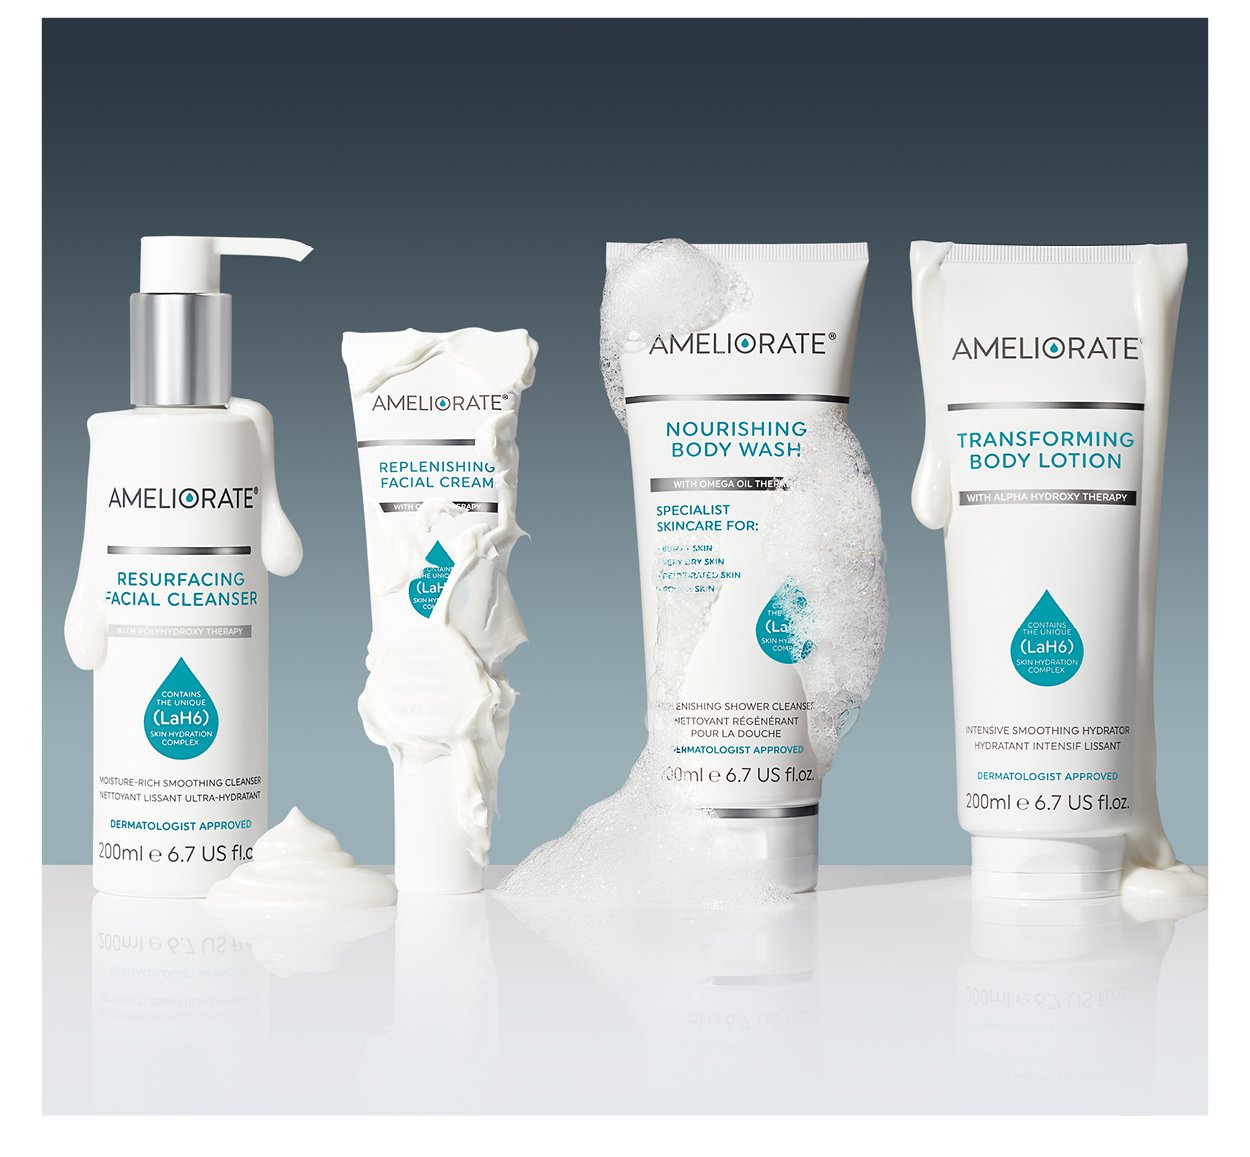 Our Ameliorate bestsellers are now on sale